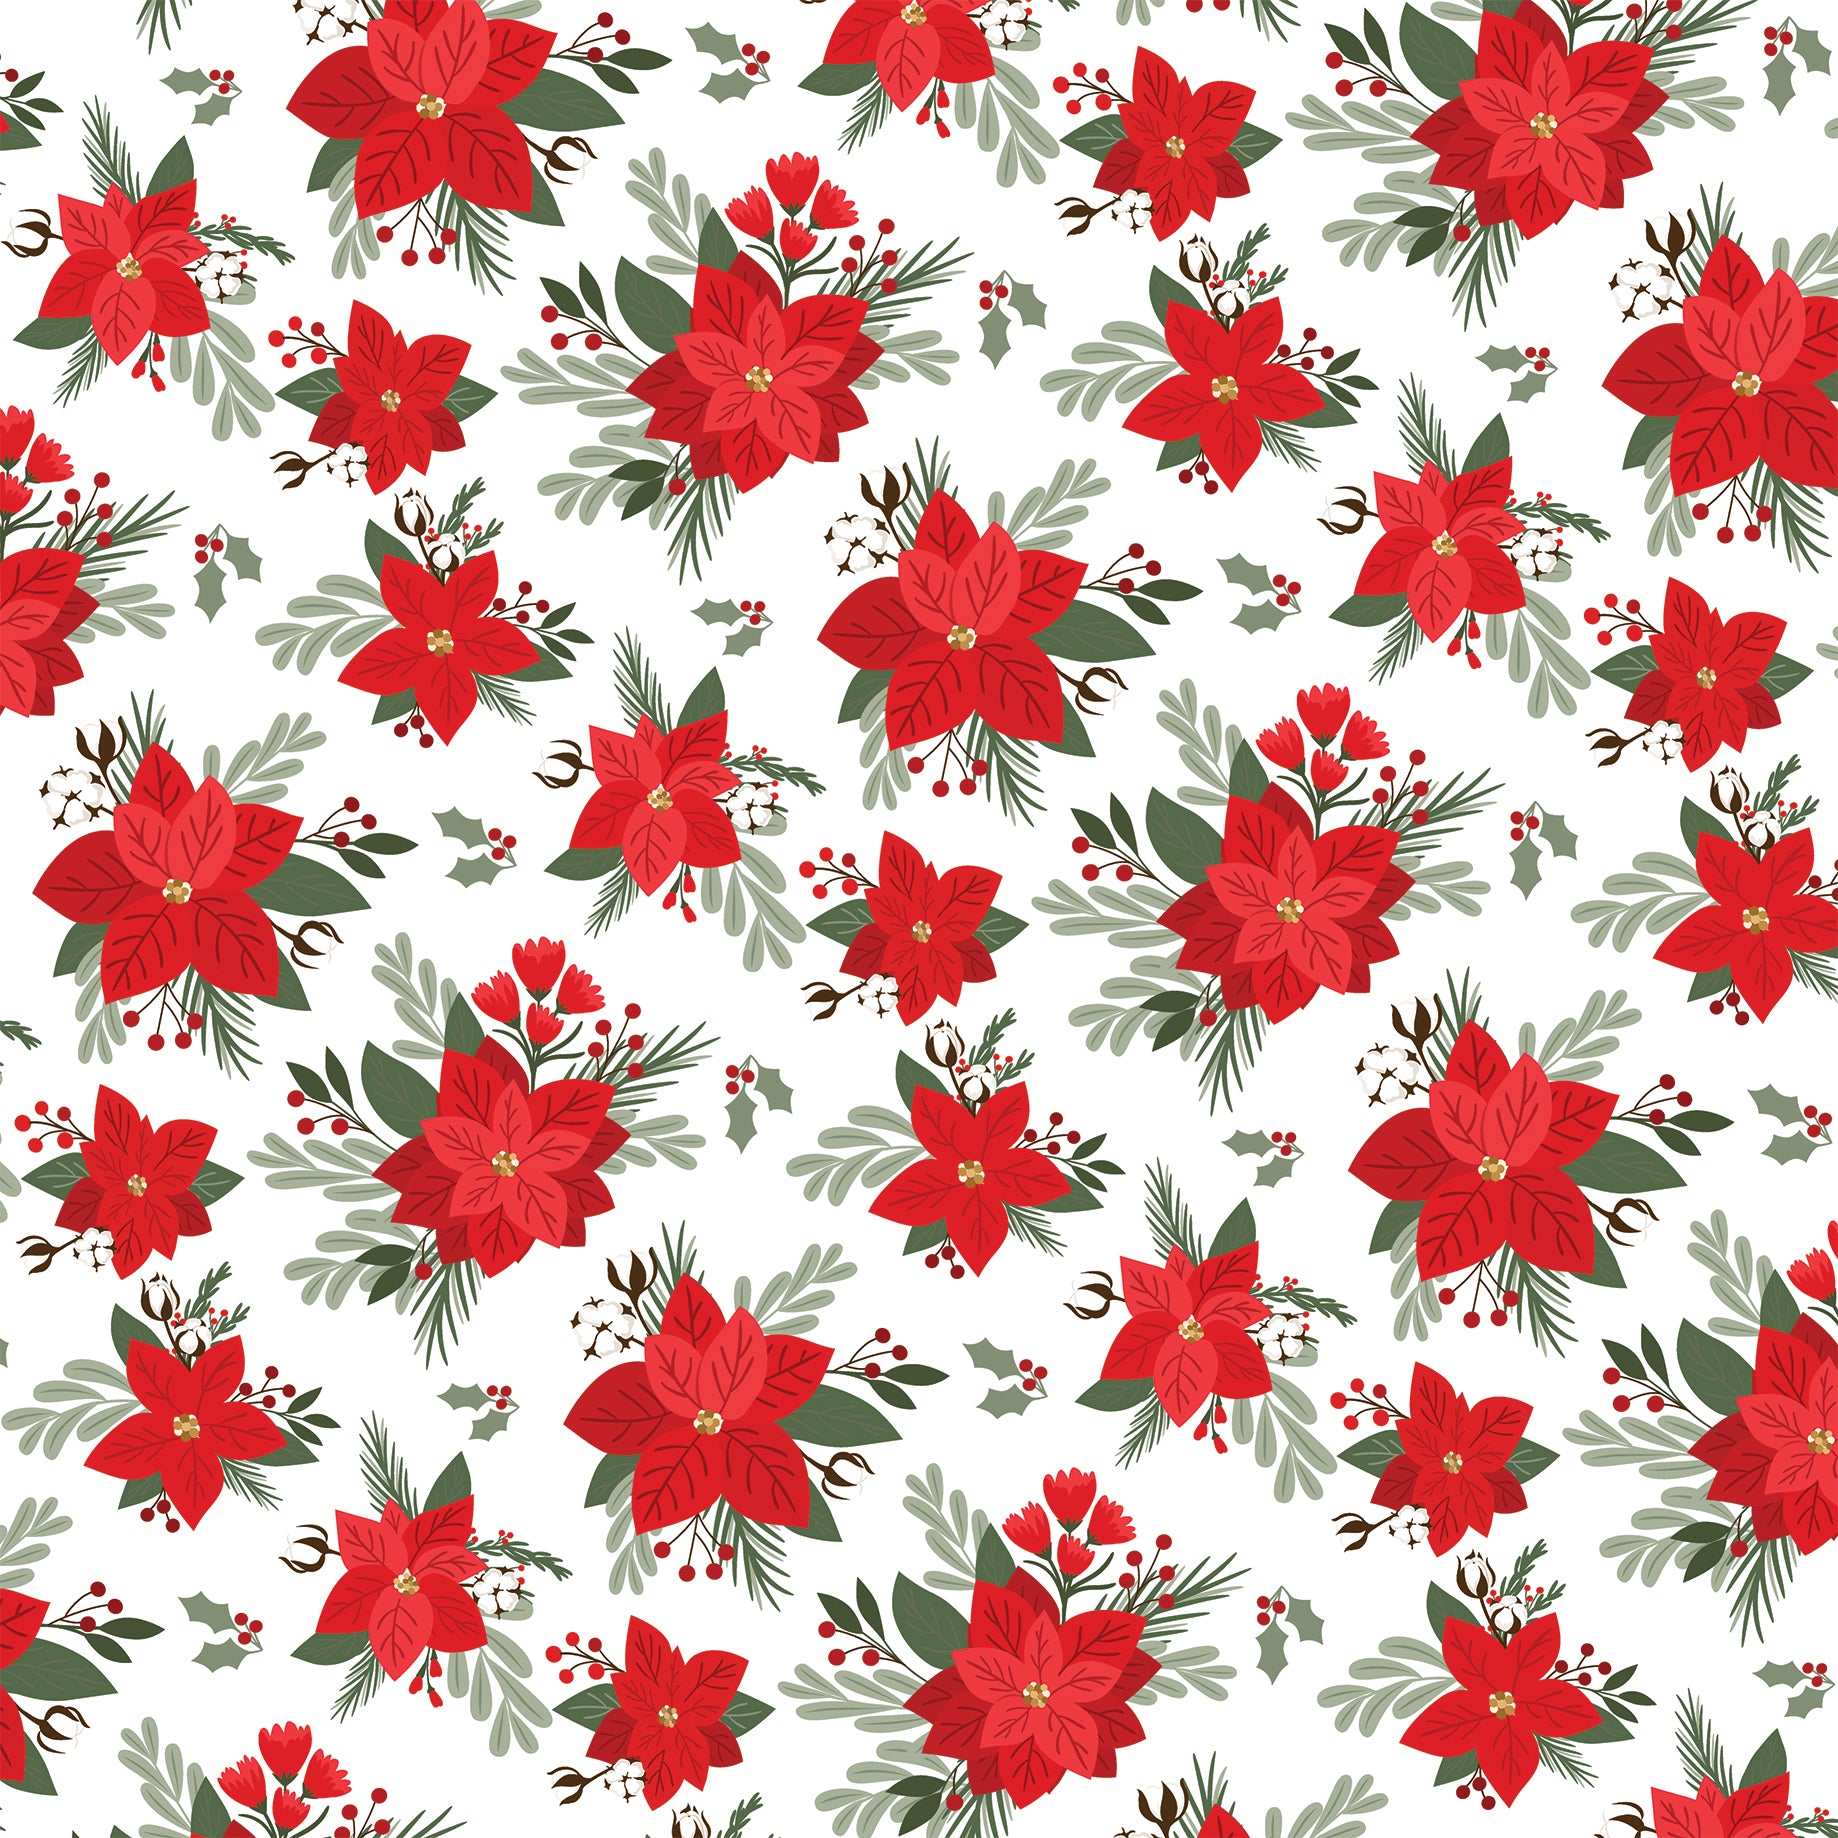 Christmas Time Collection Festive Floral 12 x 12 Double-Sided Scrapbook Paper by Echo Park Paper